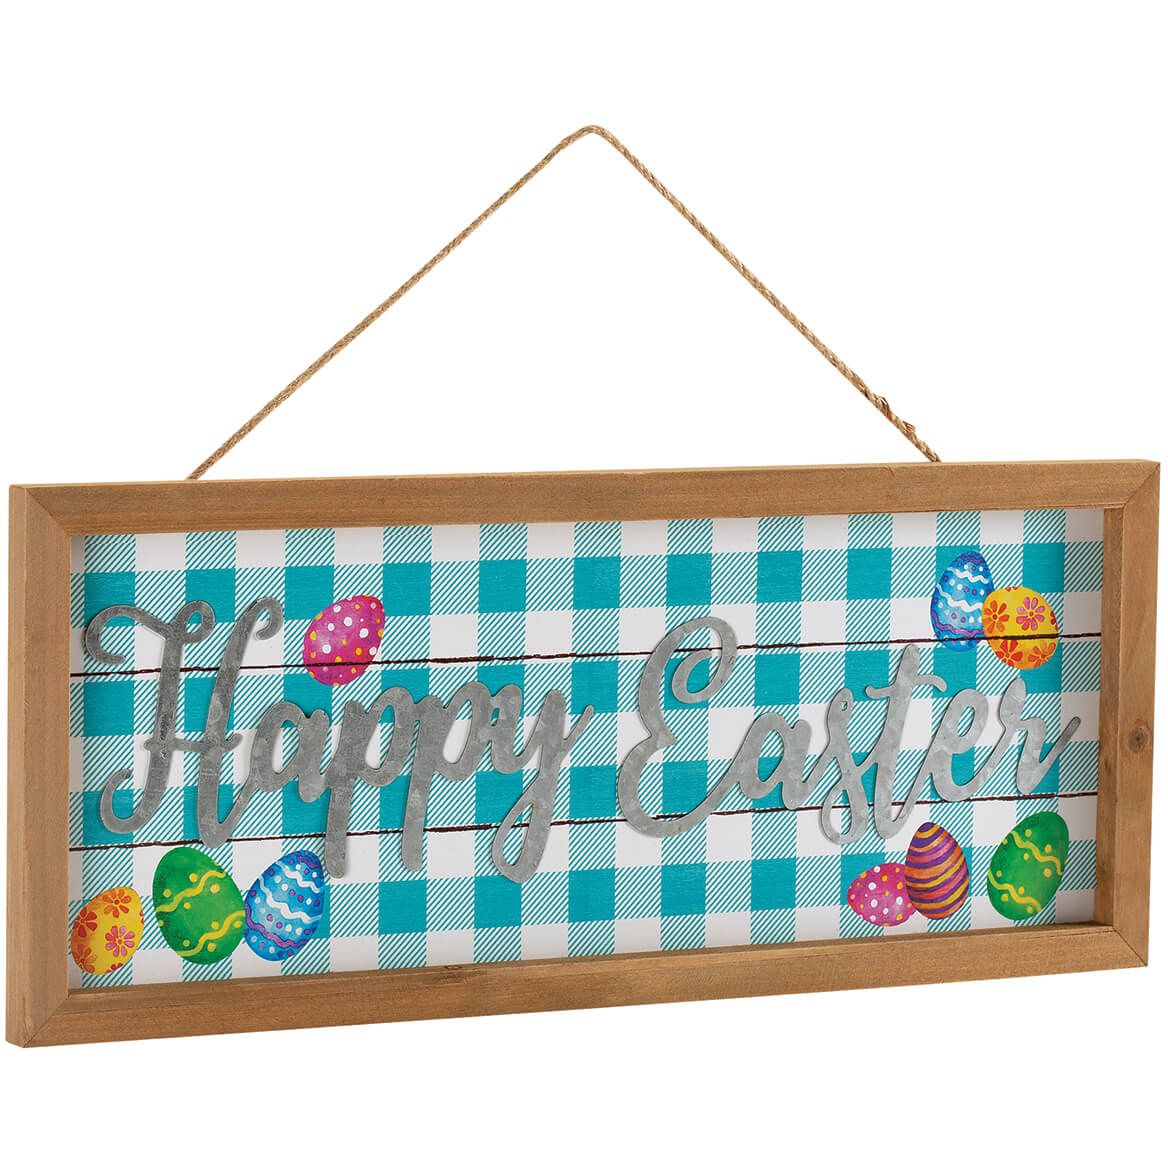 Happy Easter Wall Hanging by Holiday Peak™ + '-' + 372423